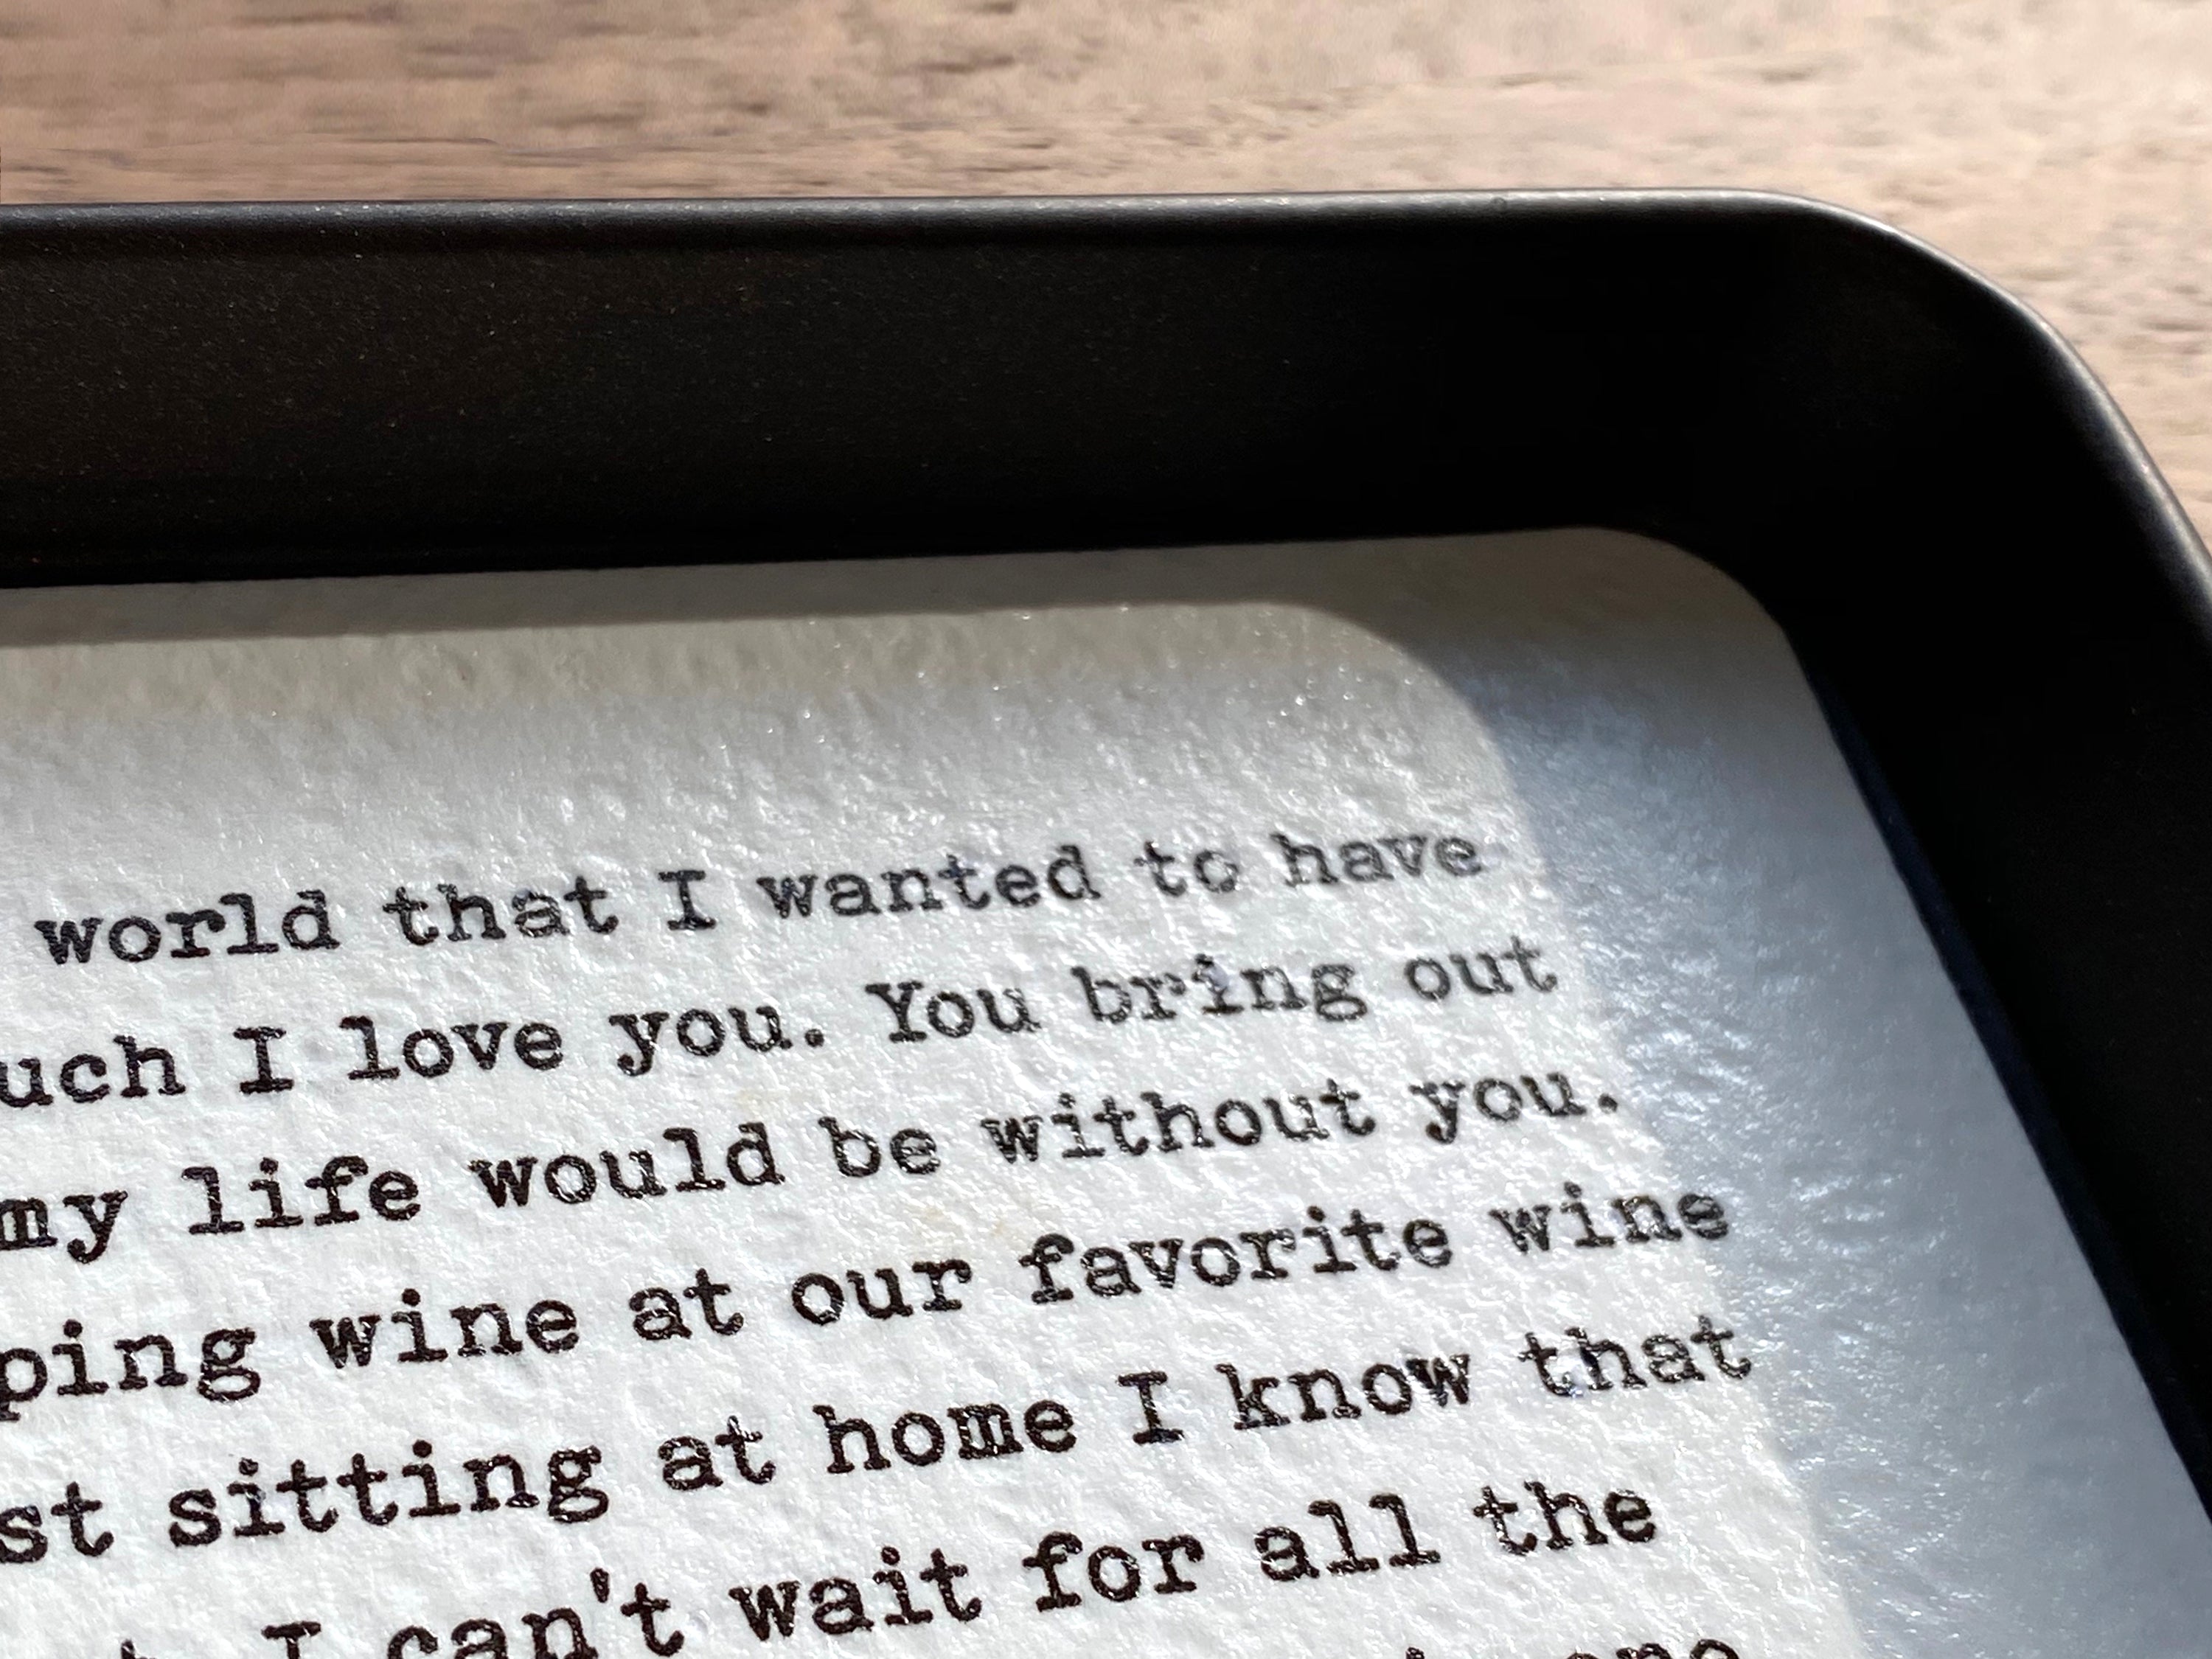 Custom Paper Tray With Your Custom Wording